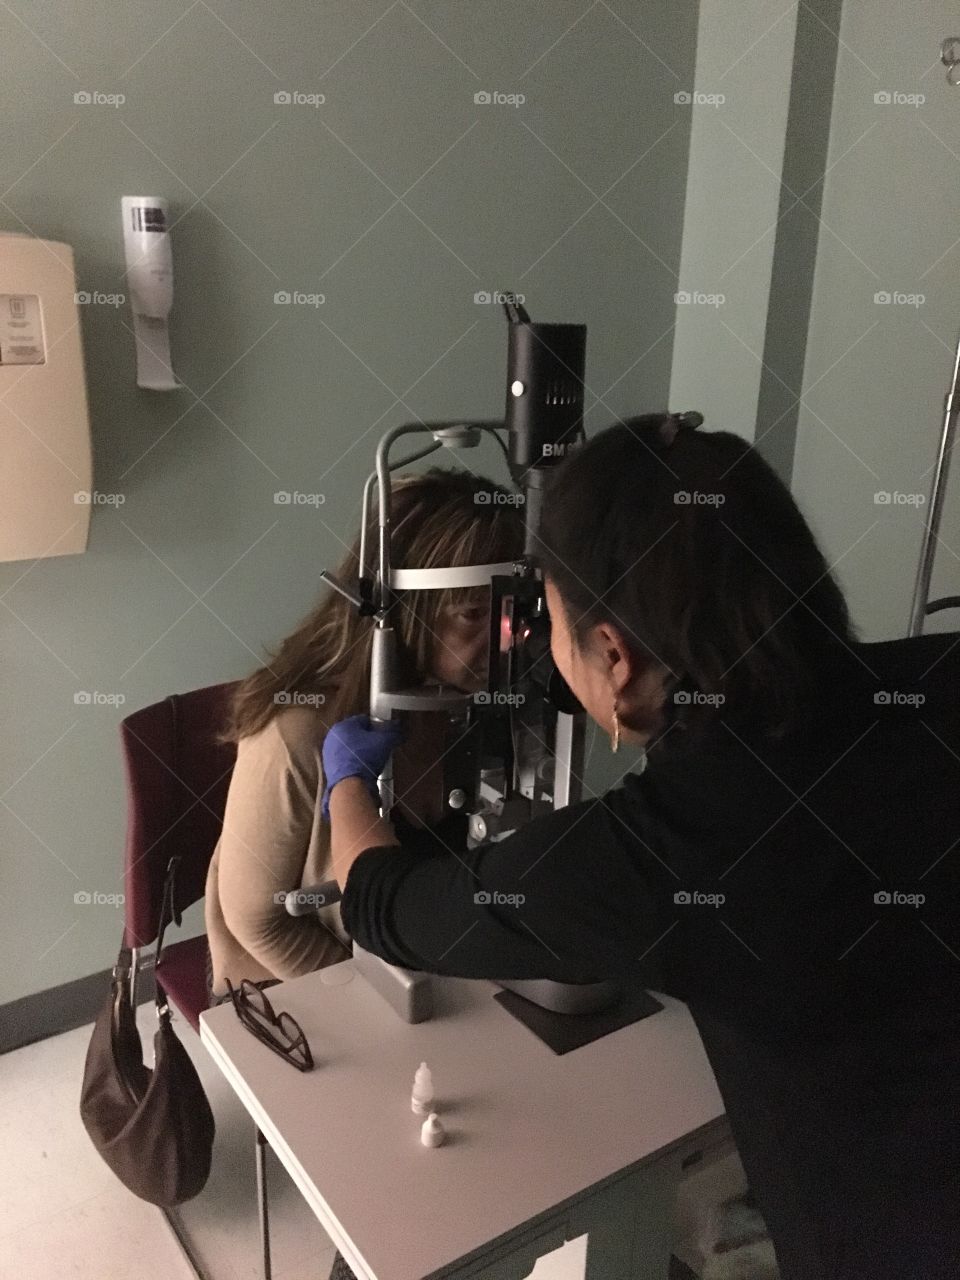 Visit to the eye doctor 